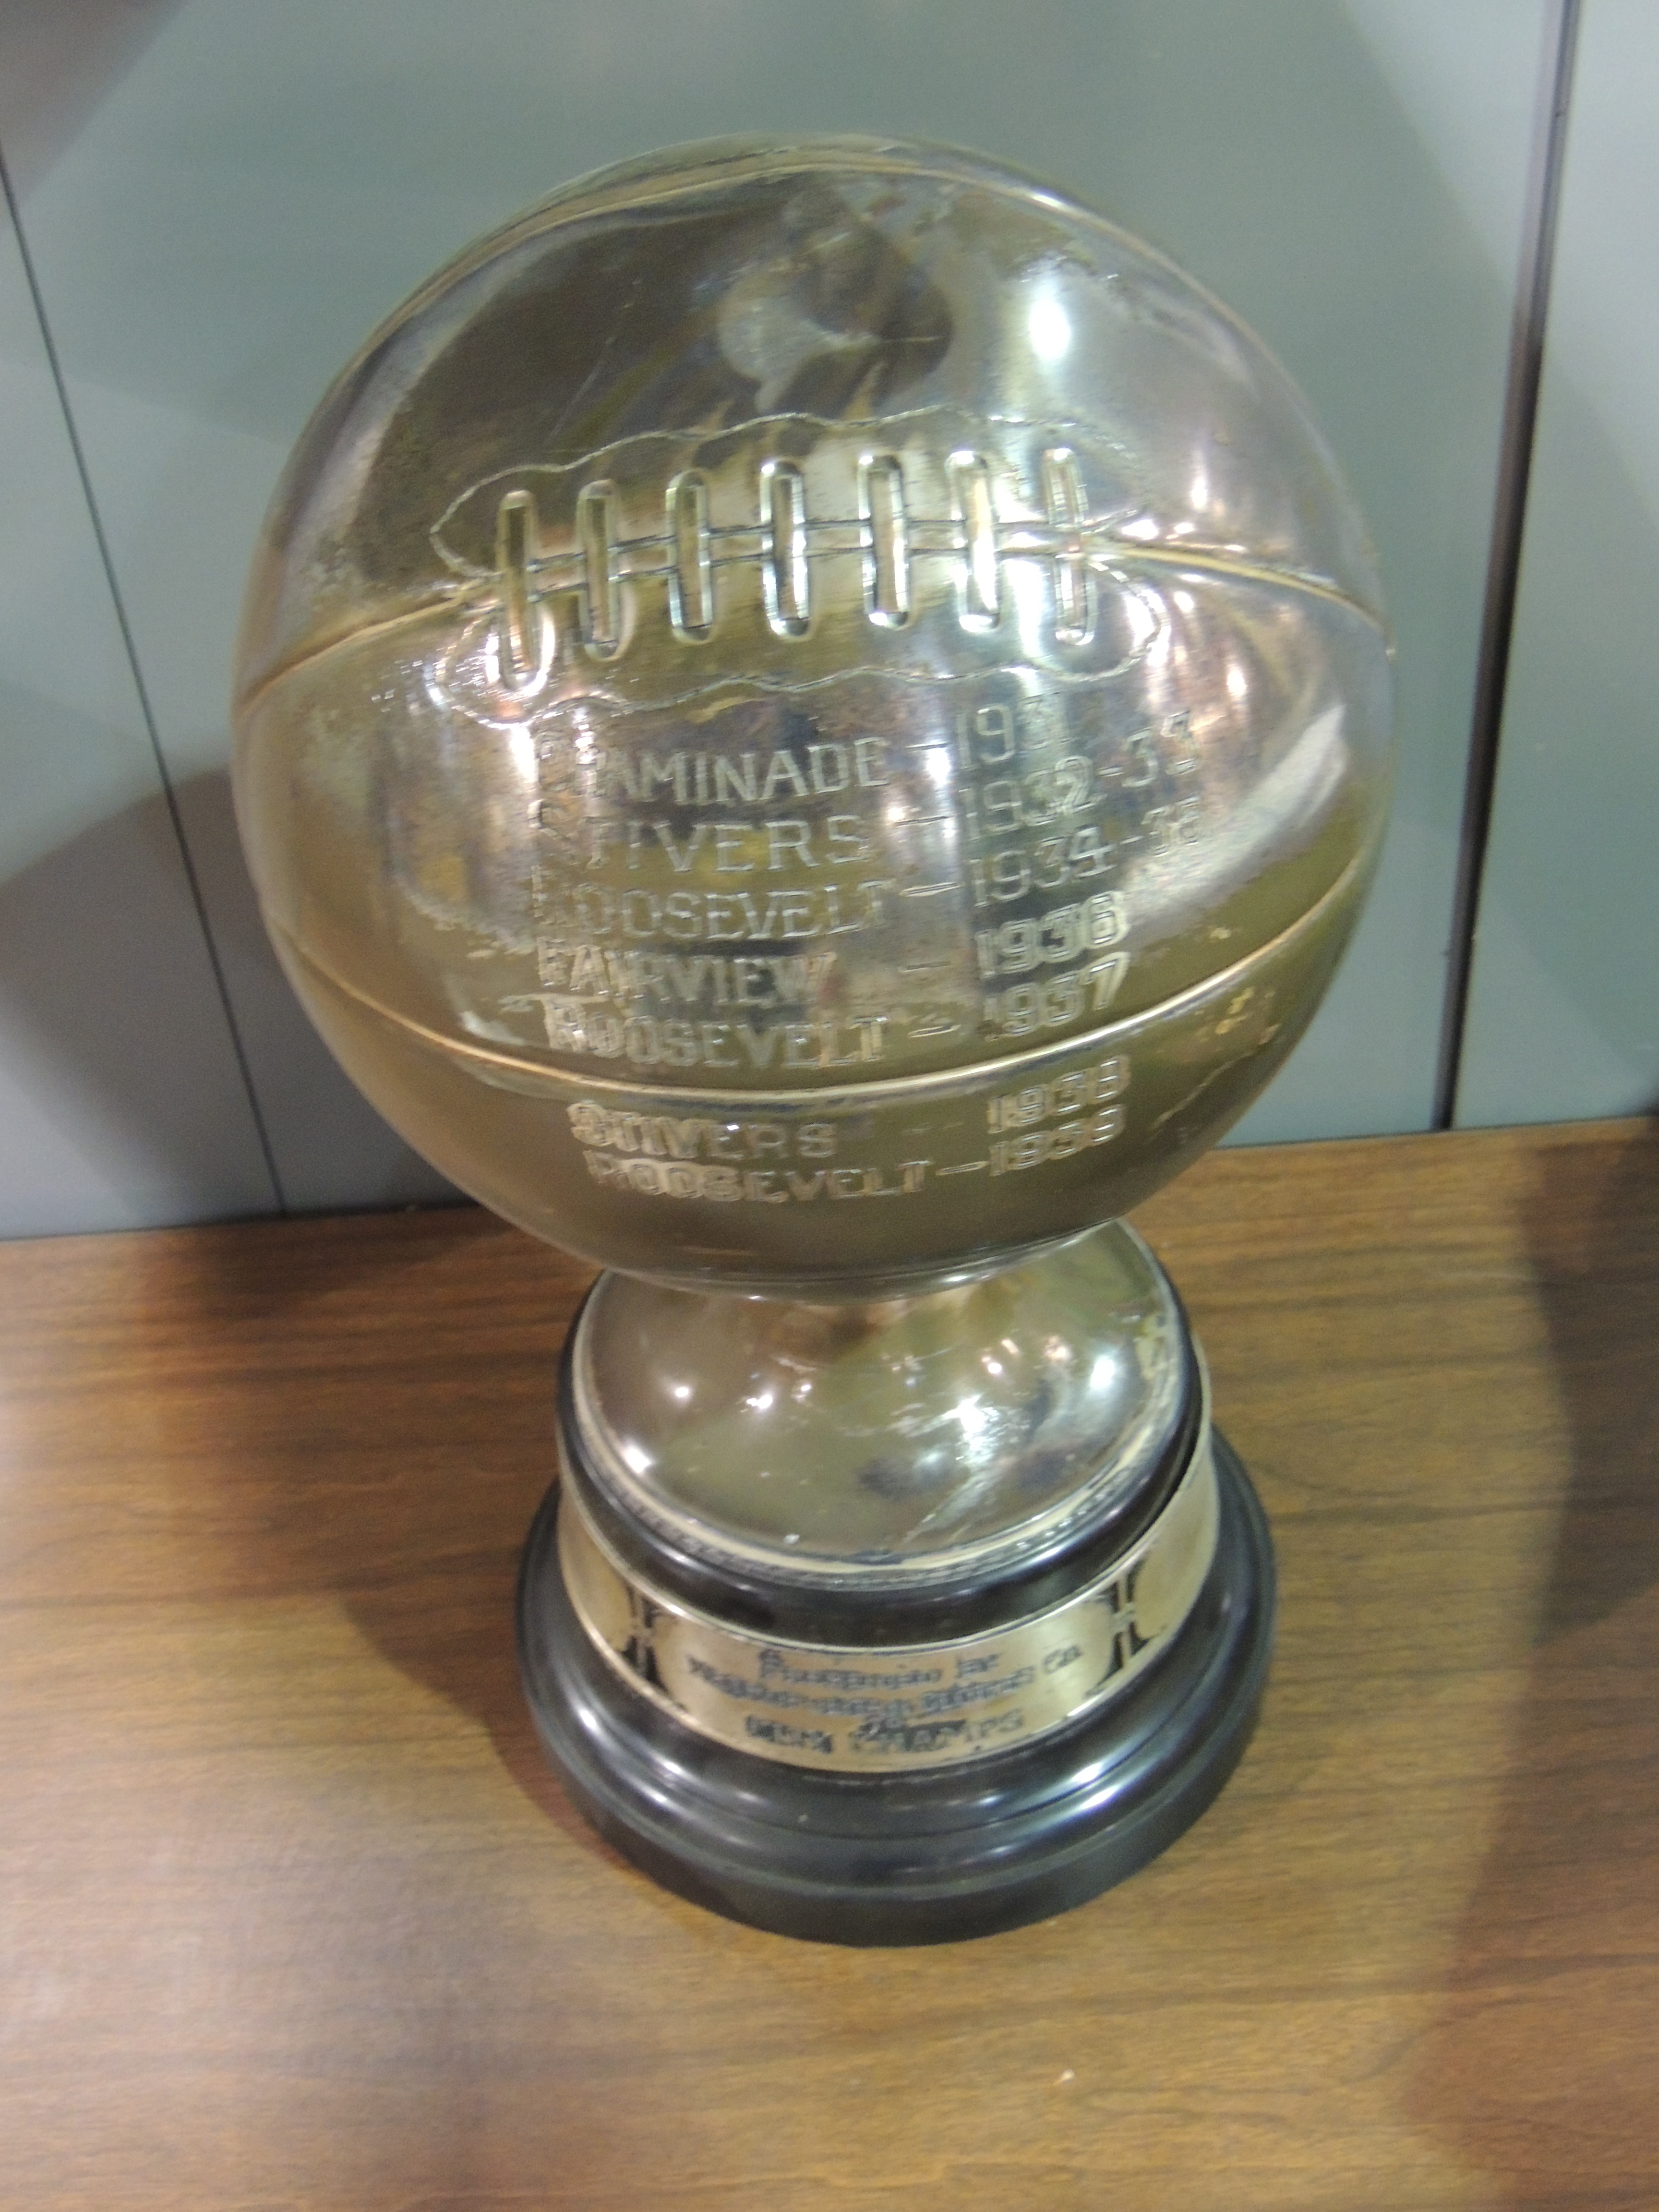 Fairview 1936 is listed on this basketball trophy.  Photo Dennis Huddleston, Class of 1965.